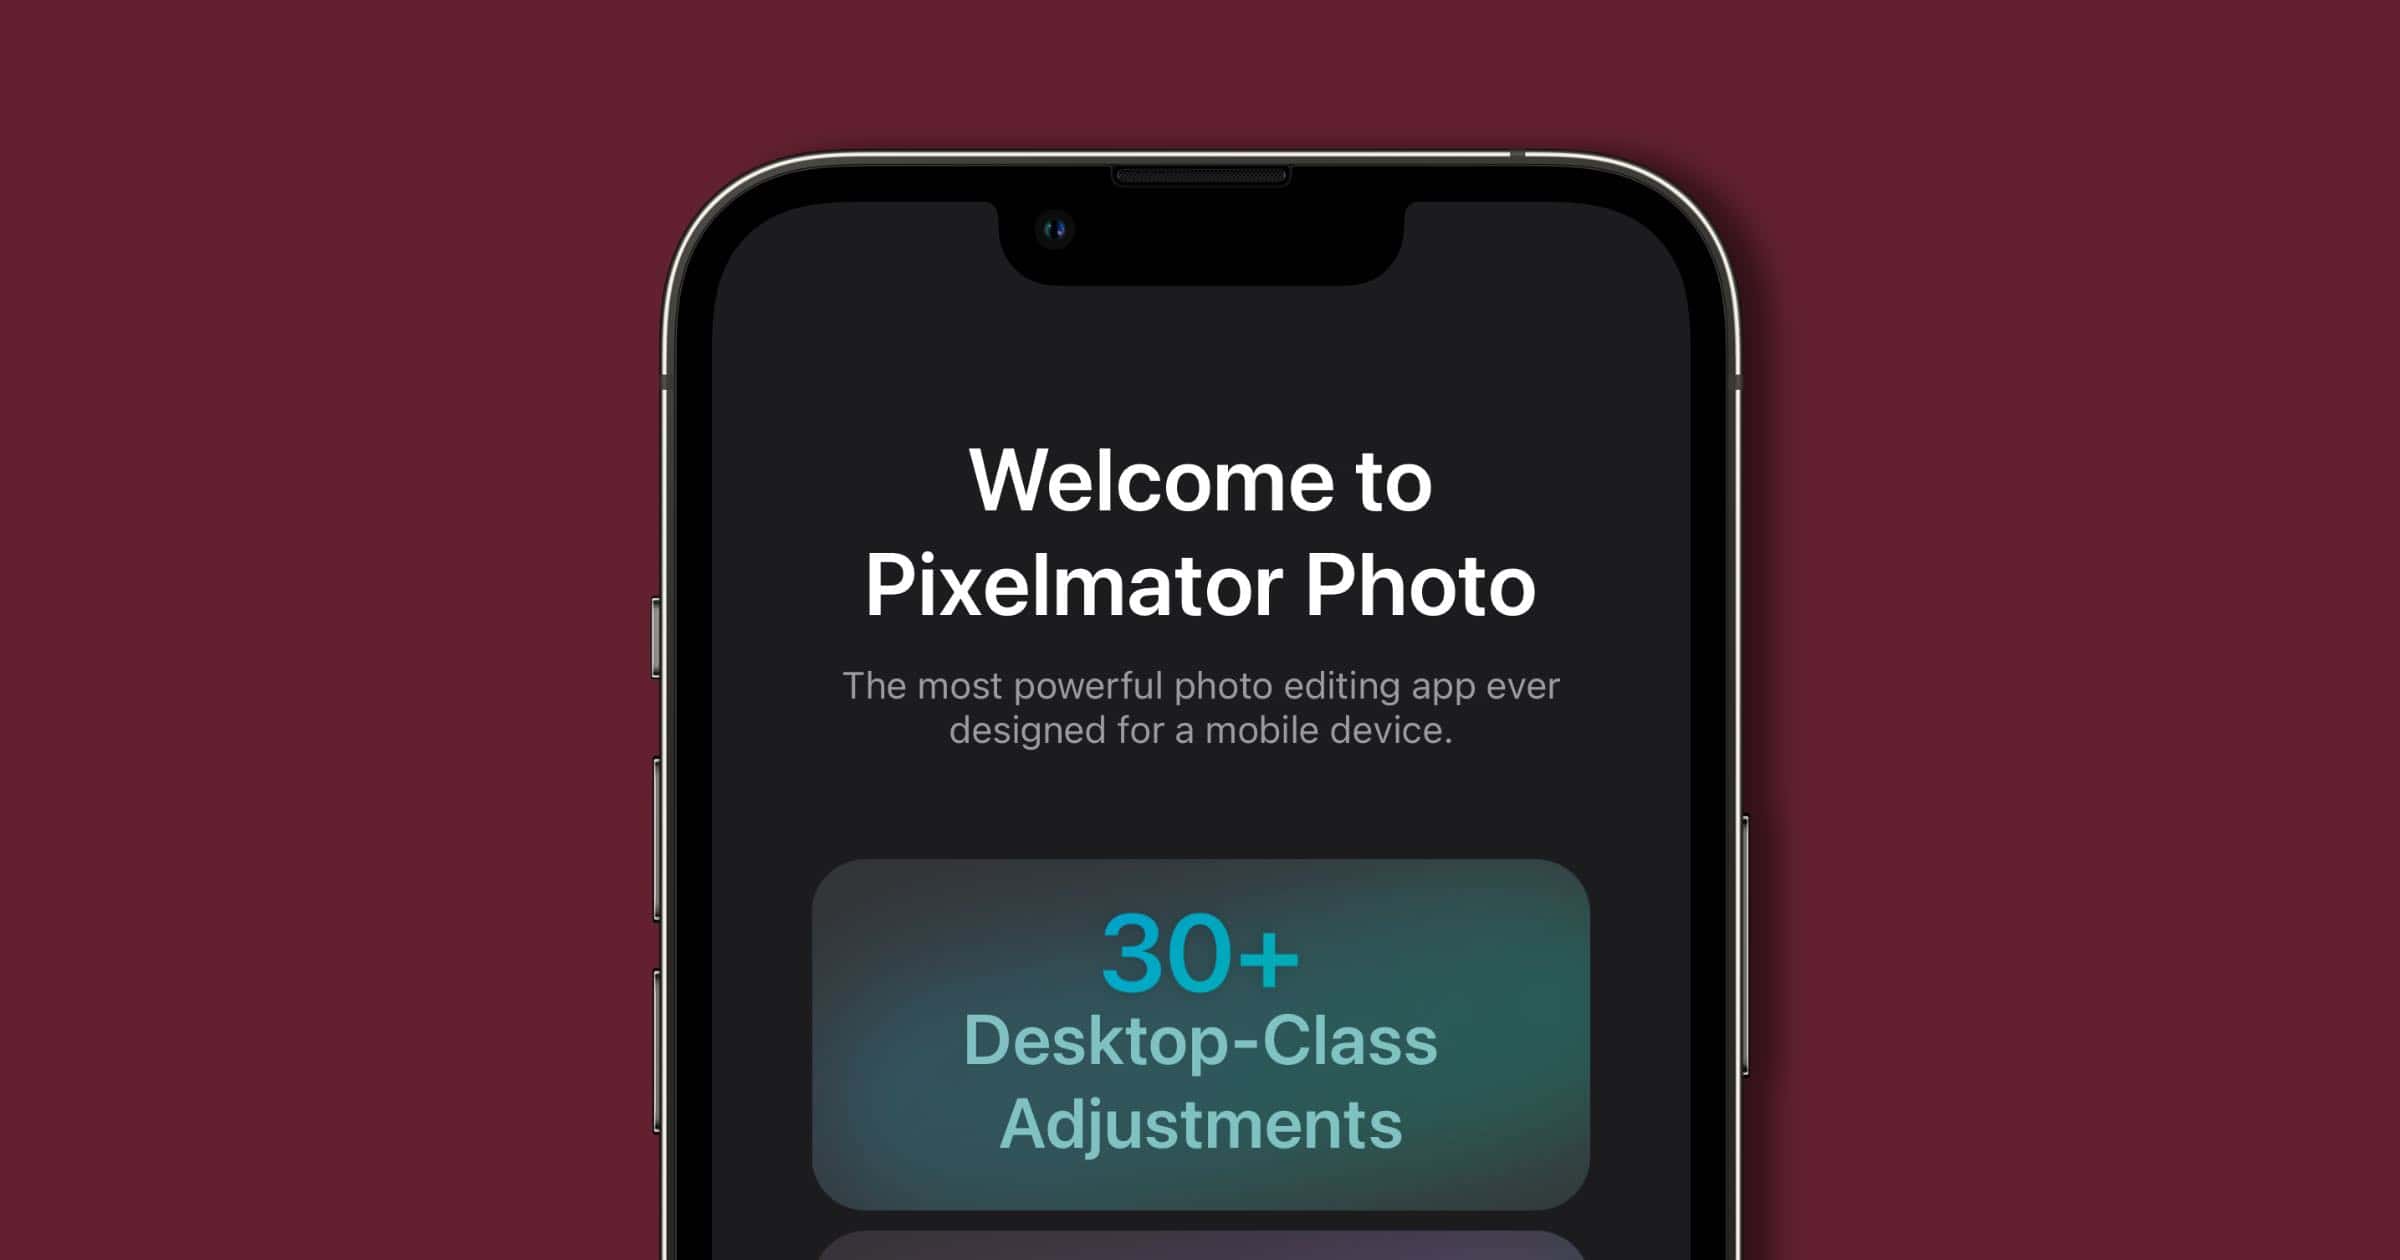 ‘Pixelmator Photo’ Launches for iPhone With 50% Off Introductory Deal